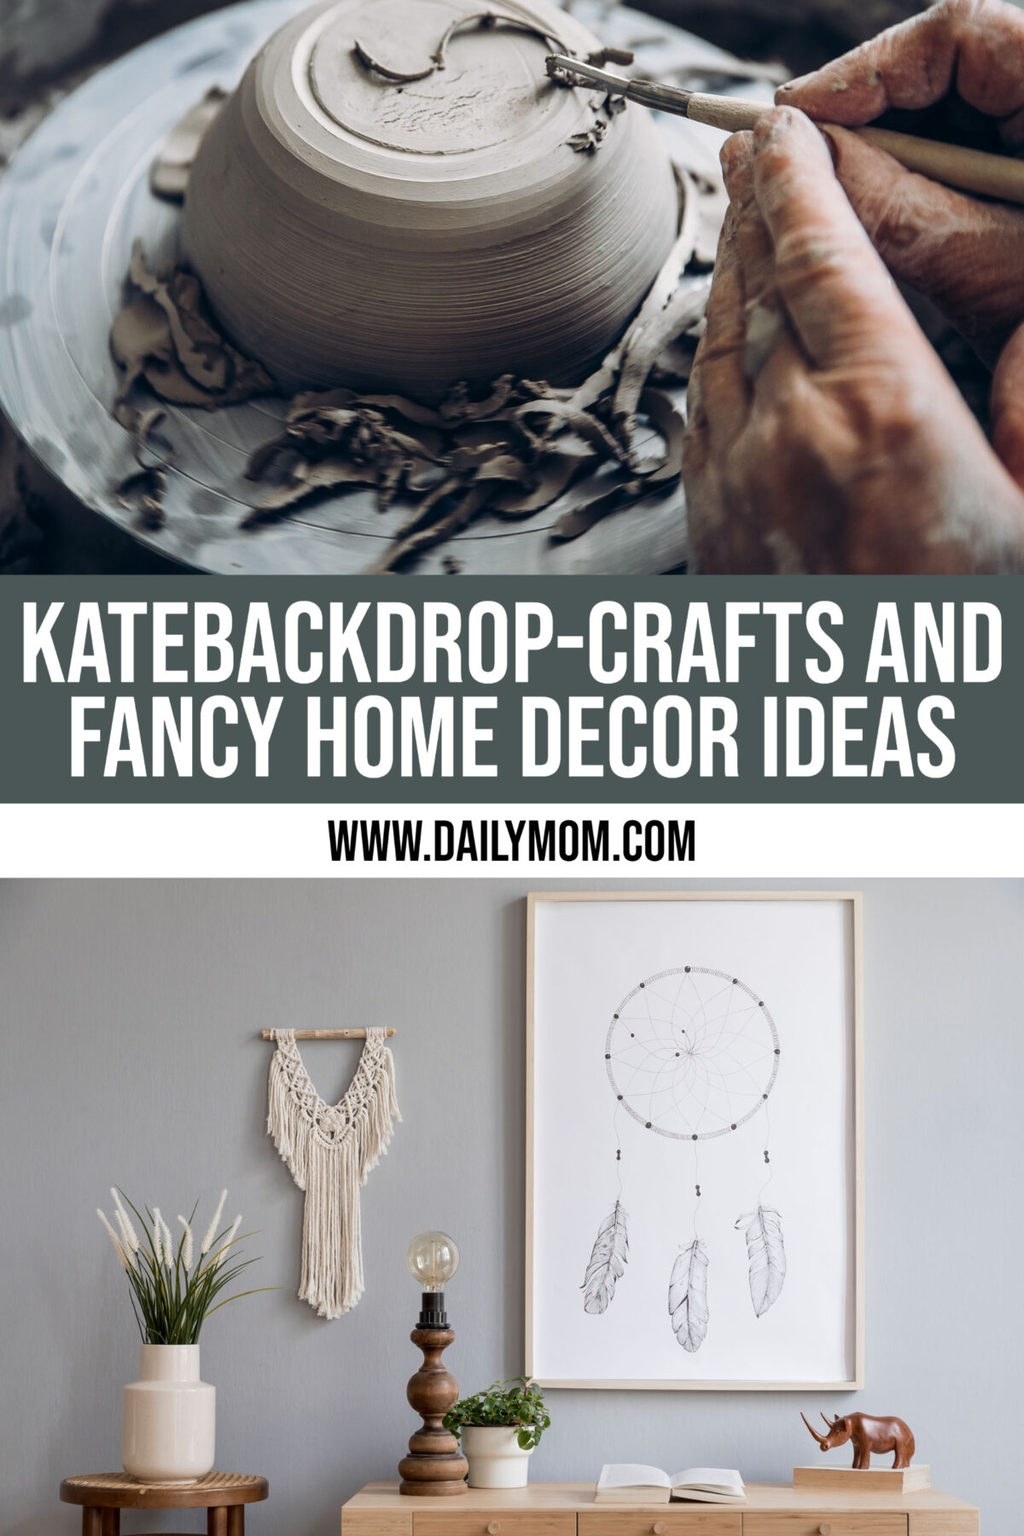 Katebackdrop: New Curated Crafts To Fancy Home Decor Ideas – A Must-Have In 2022